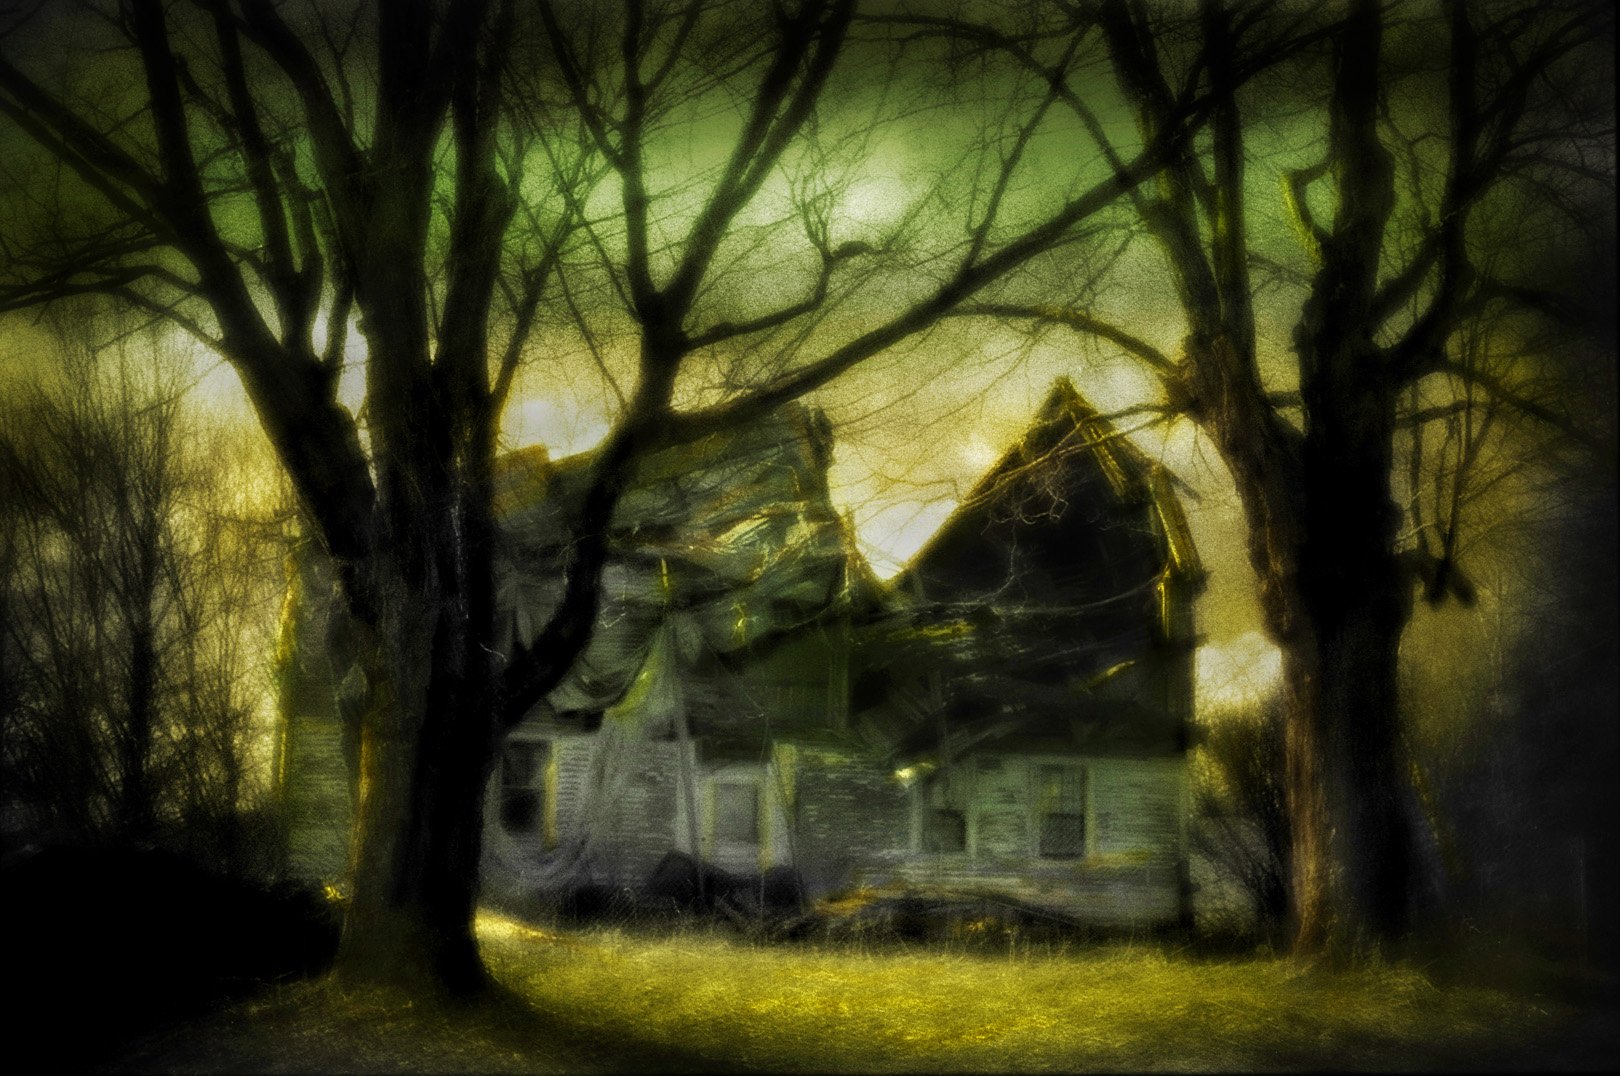 A painting of an old house in the woods